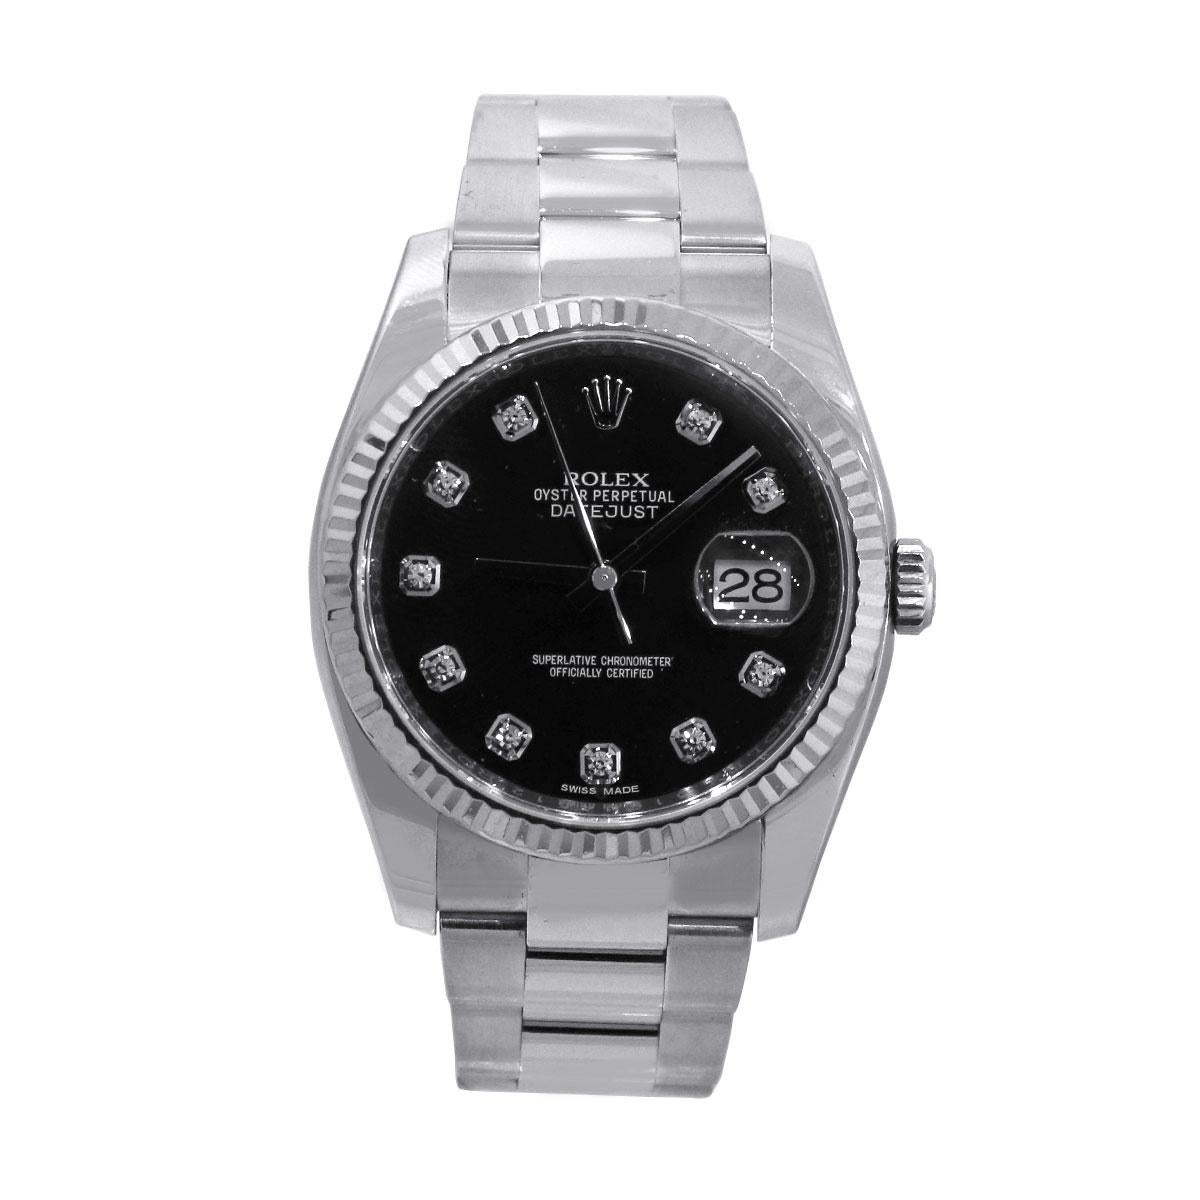 Brand: Rolex
MPN: 116234
Model: Datejust
Case Material: Stainless Steel
Case Diameter: 36mm
Crystal: Sapphire Crystal
Bezel: Stainless Steel fluted bezel
Dial: Black dial with Silver hands and diamond hour markers. Date can be found at 3